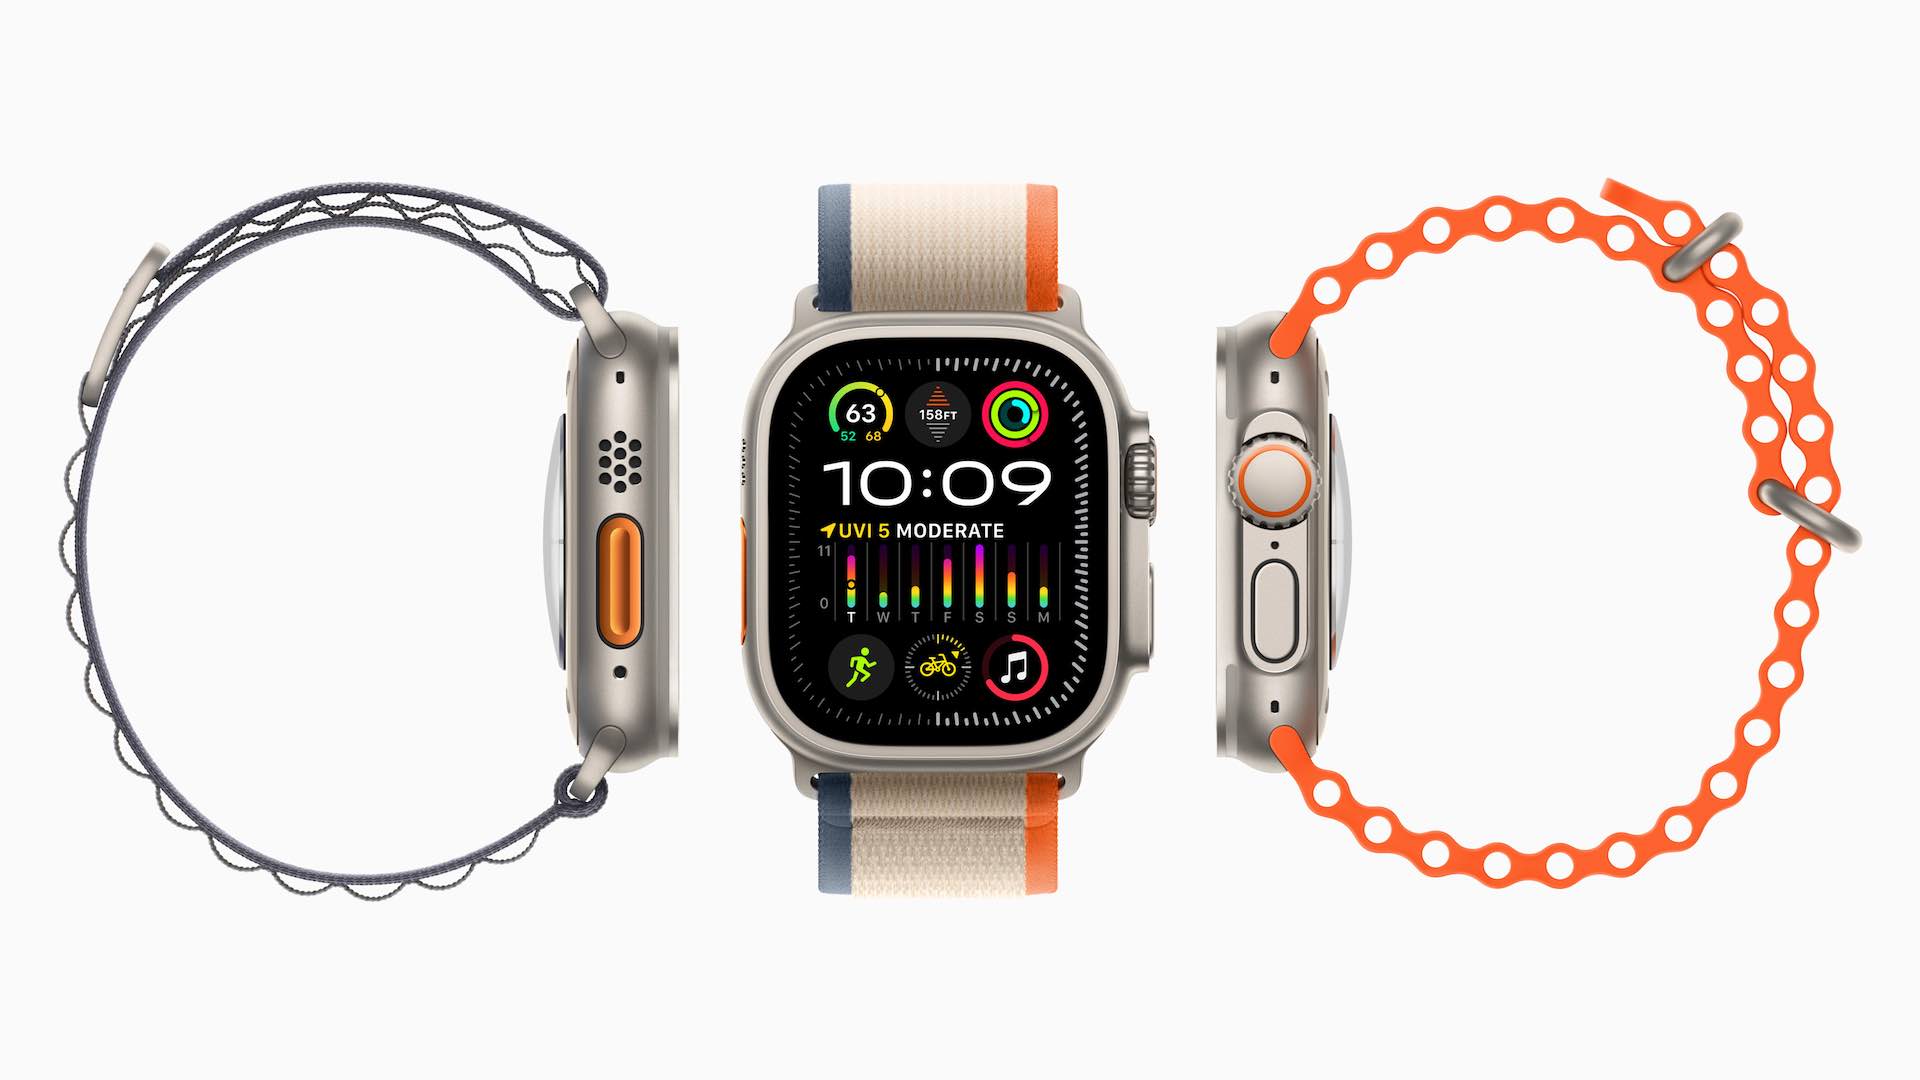 Apple watch Afib feature secures historic FDA approval